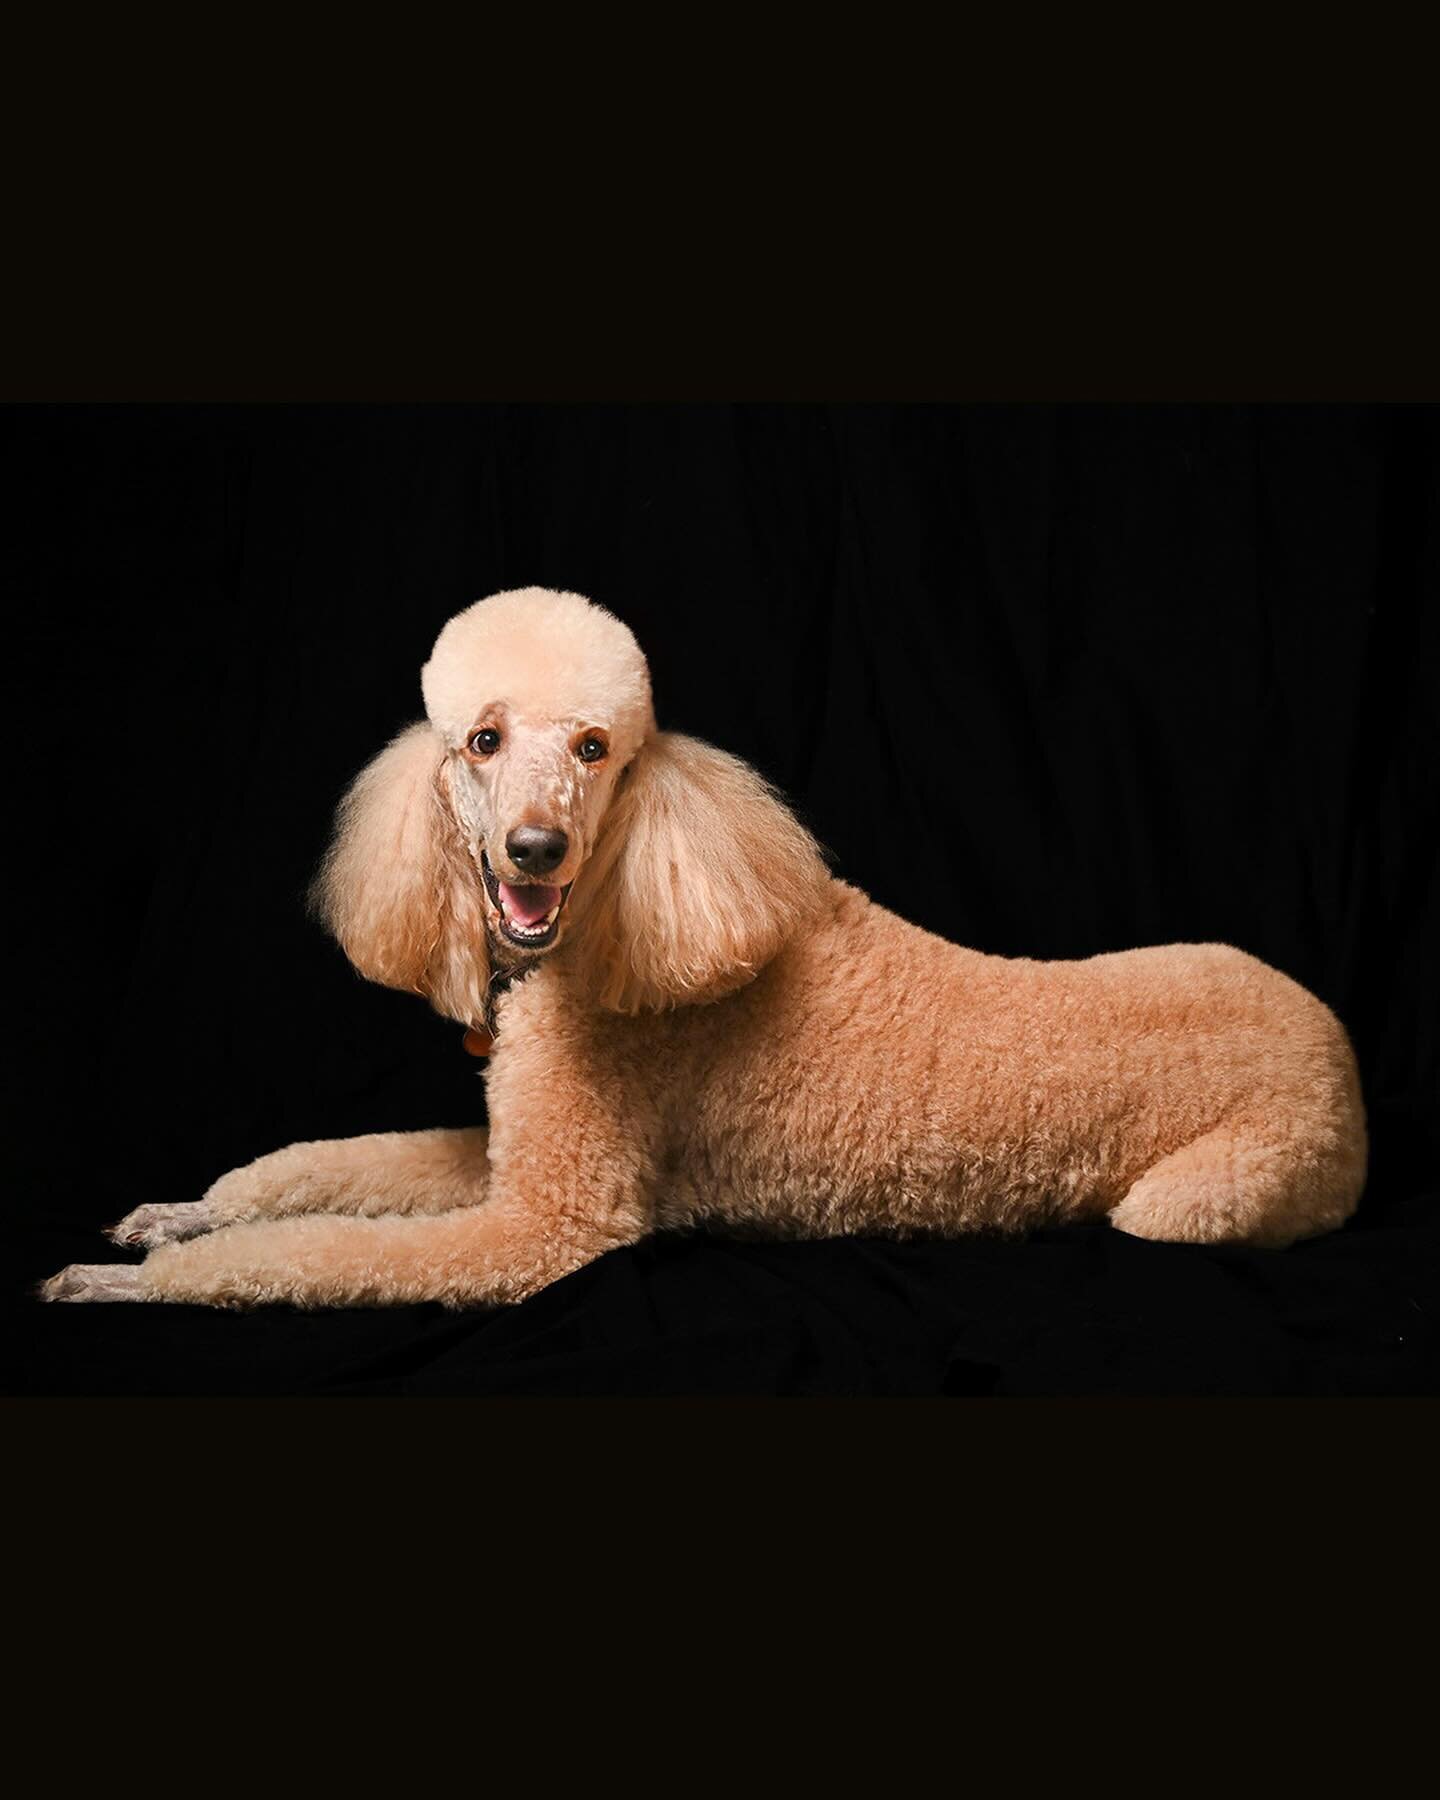 Murphy&rsquo;s photo session. What a sweet and handsome dog 🐩 #LoriGphotography #Petphotographer, #Petphotography #Poodle, #Dogportraits #Indianaphotographer, #Michiganphotographer #Dogs #Dogphotographer